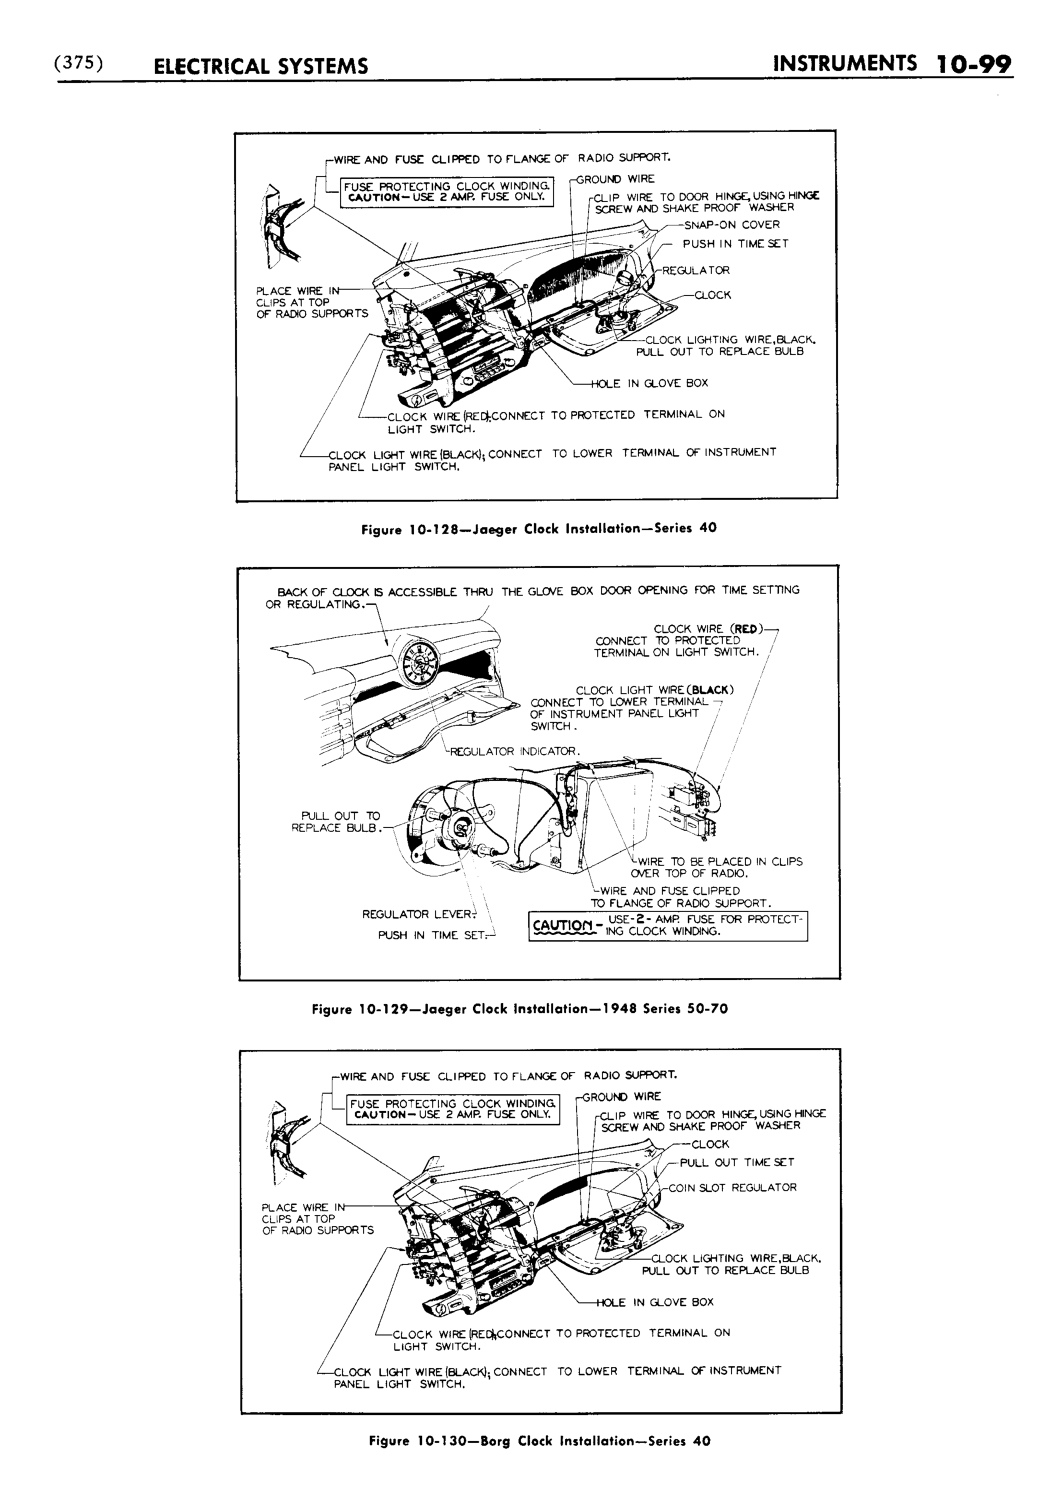 n_11 1948 Buick Shop Manual - Electrical Systems-099-099.jpg